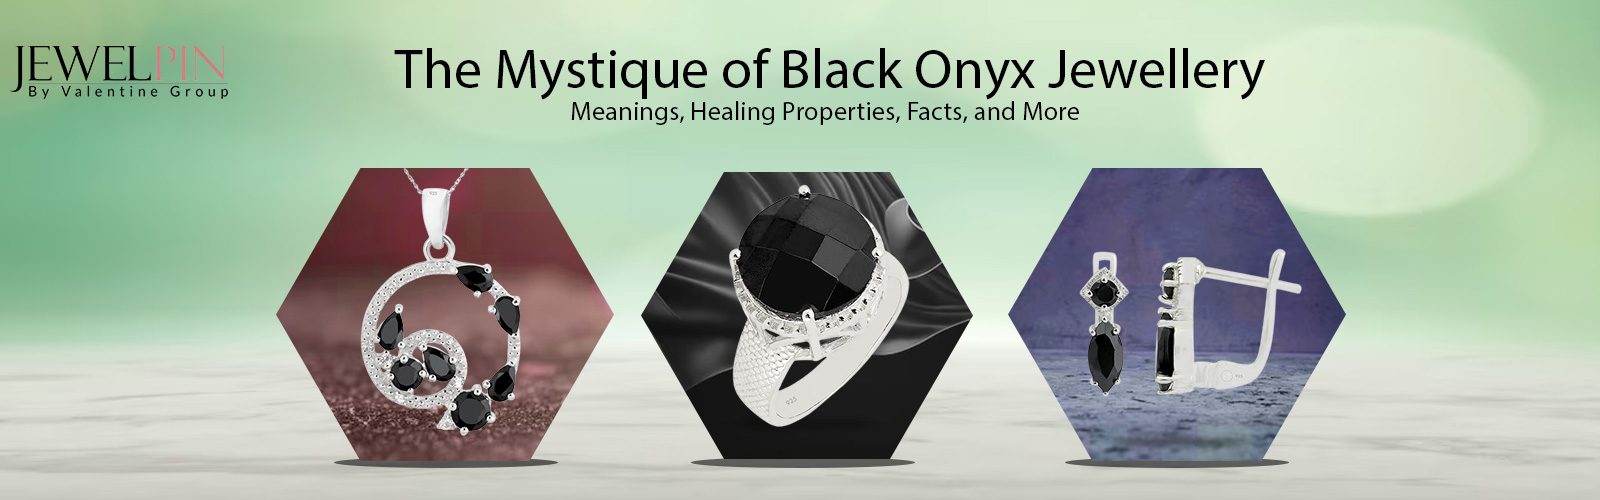 The Mystique of Black Onyx Jewellery Meanings Healing Properties Facts and More - JewelPin